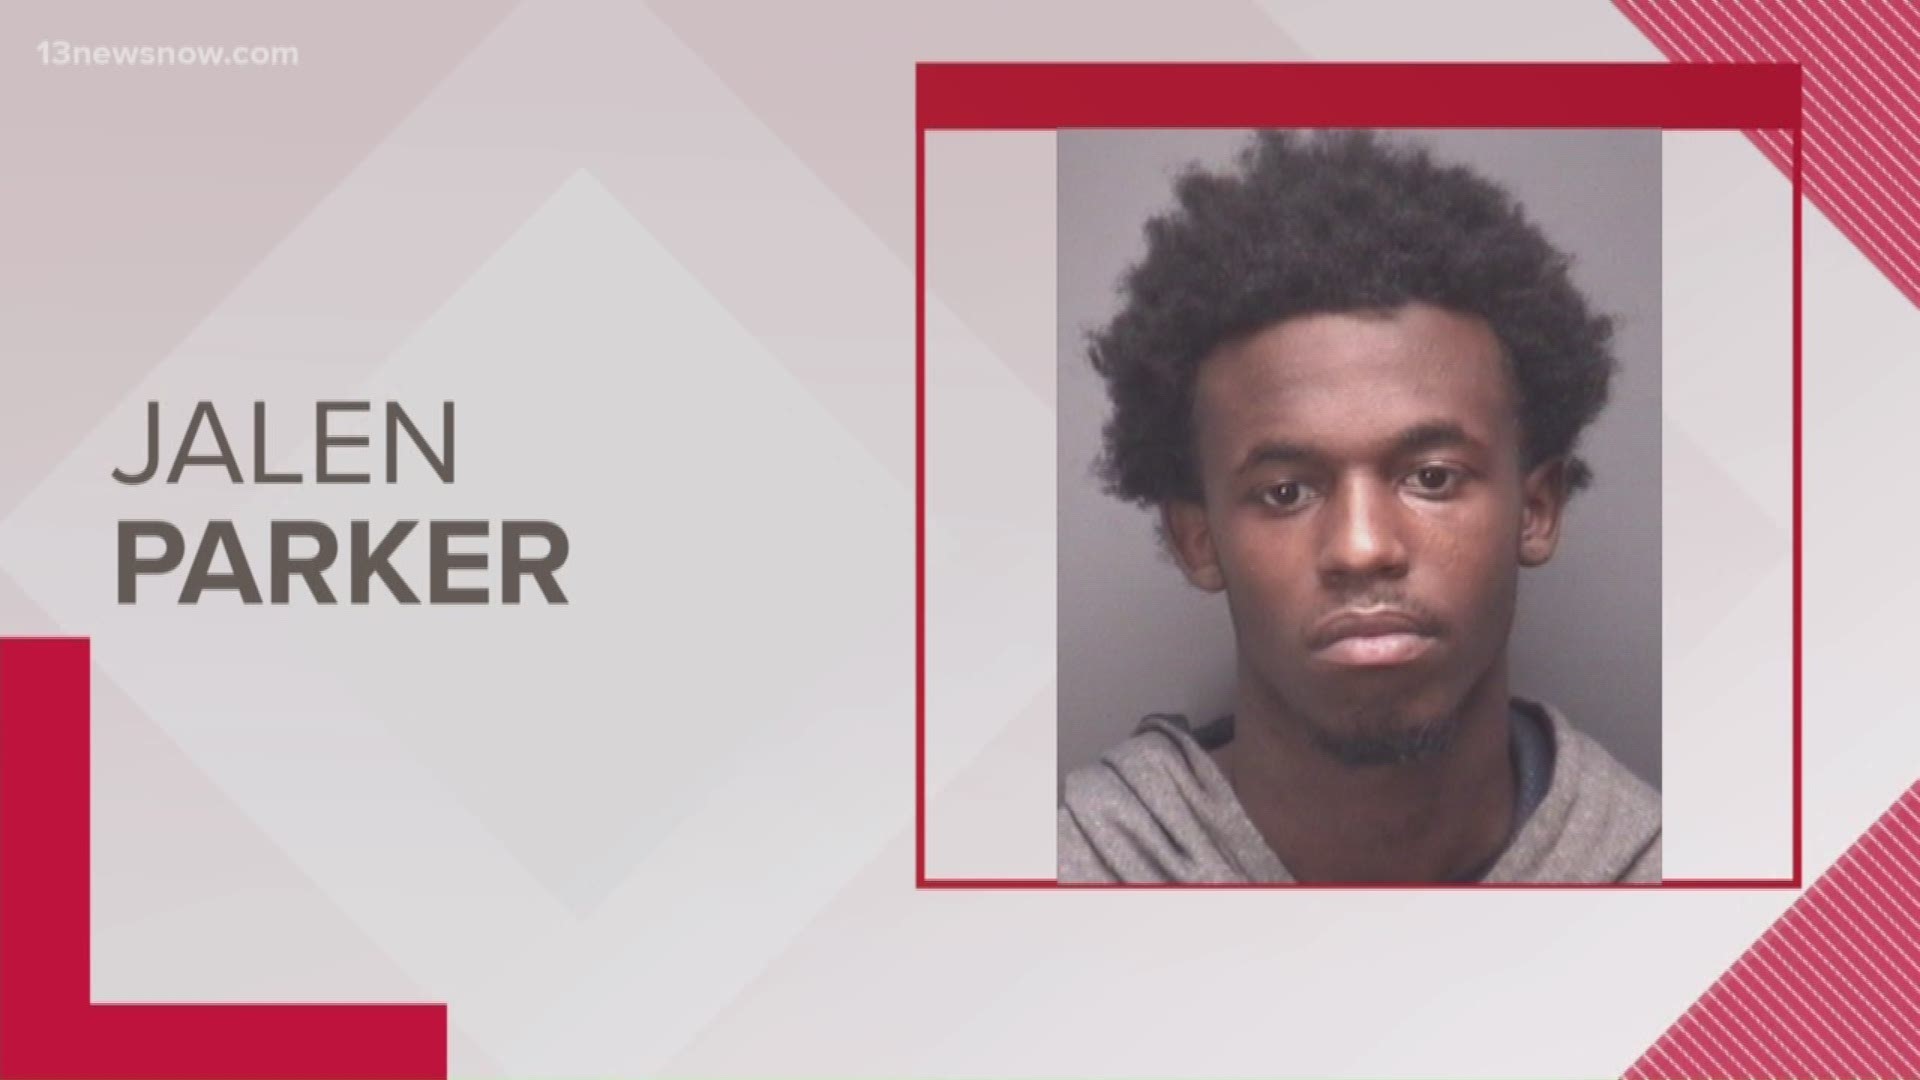 Jalen Parker, 18 was arrested after he allegedly made a threat against Kings Fork High School. Police stepped up patrols at the school as a precaution.